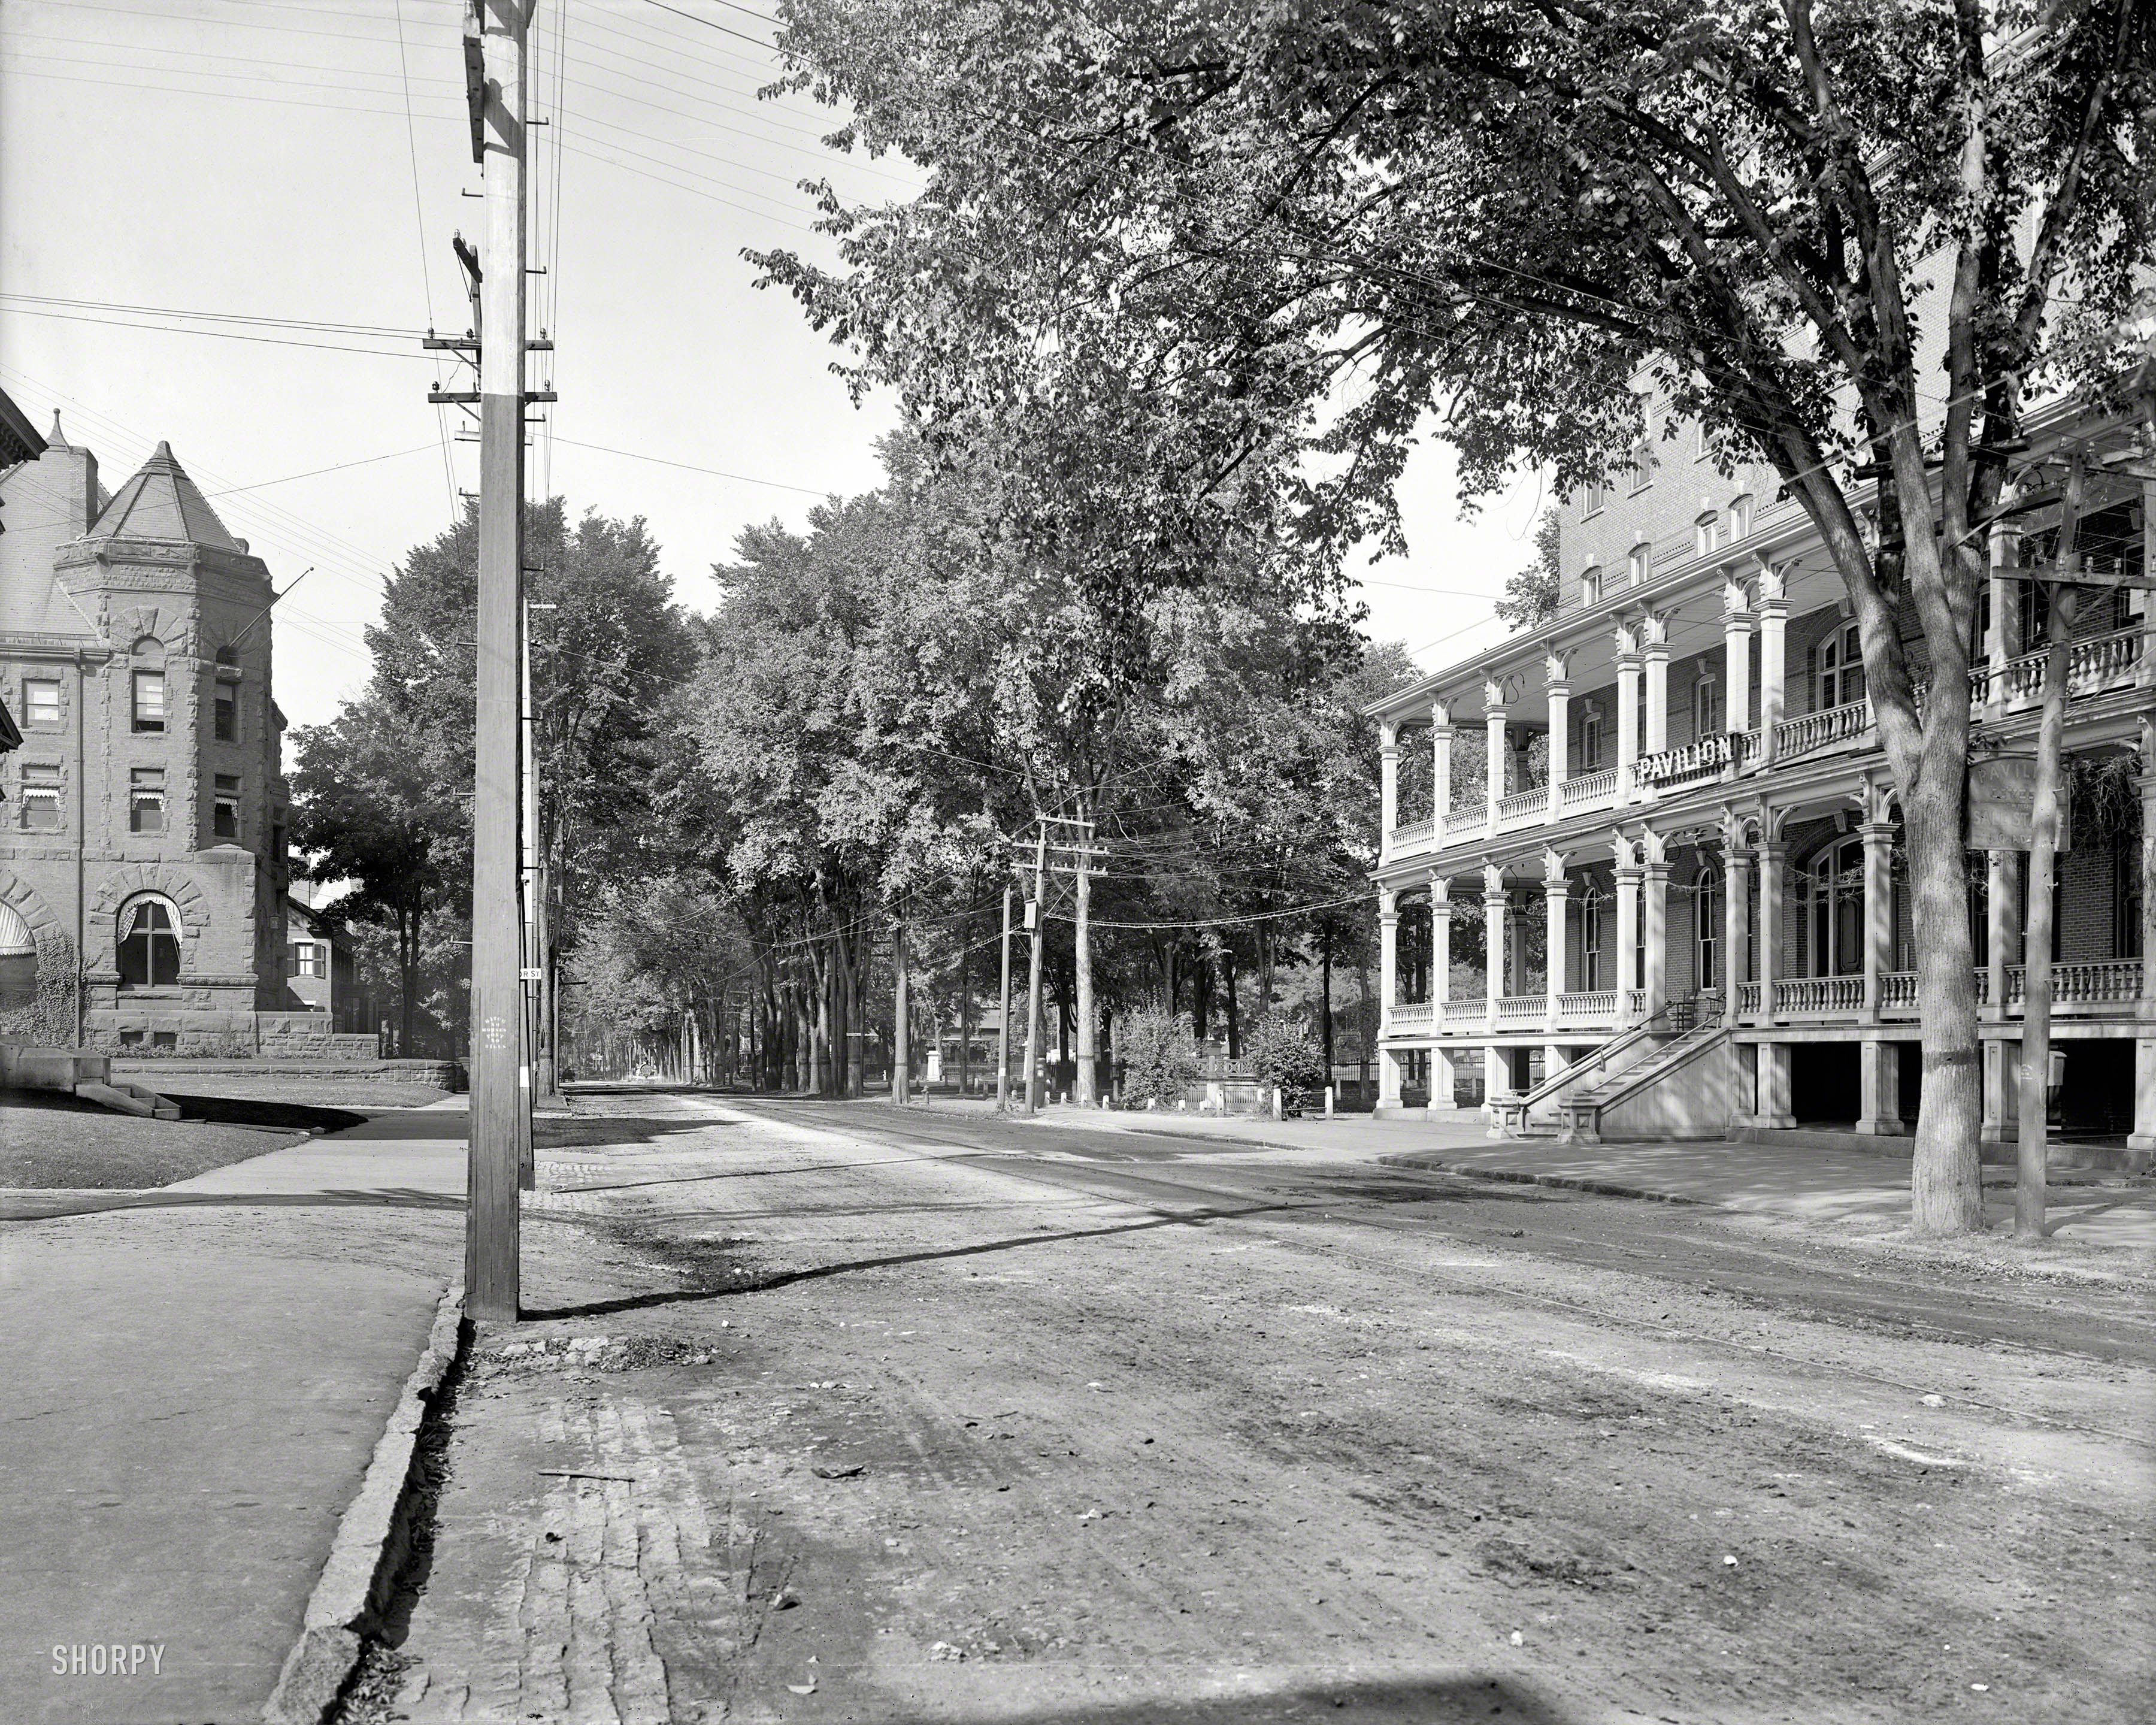 Circa 1904. "State Street and Pavilion Hotel, Montpelier, Vermont." 8x10 inch dry plate glass negative, Detroit Publishing Company. View full size.